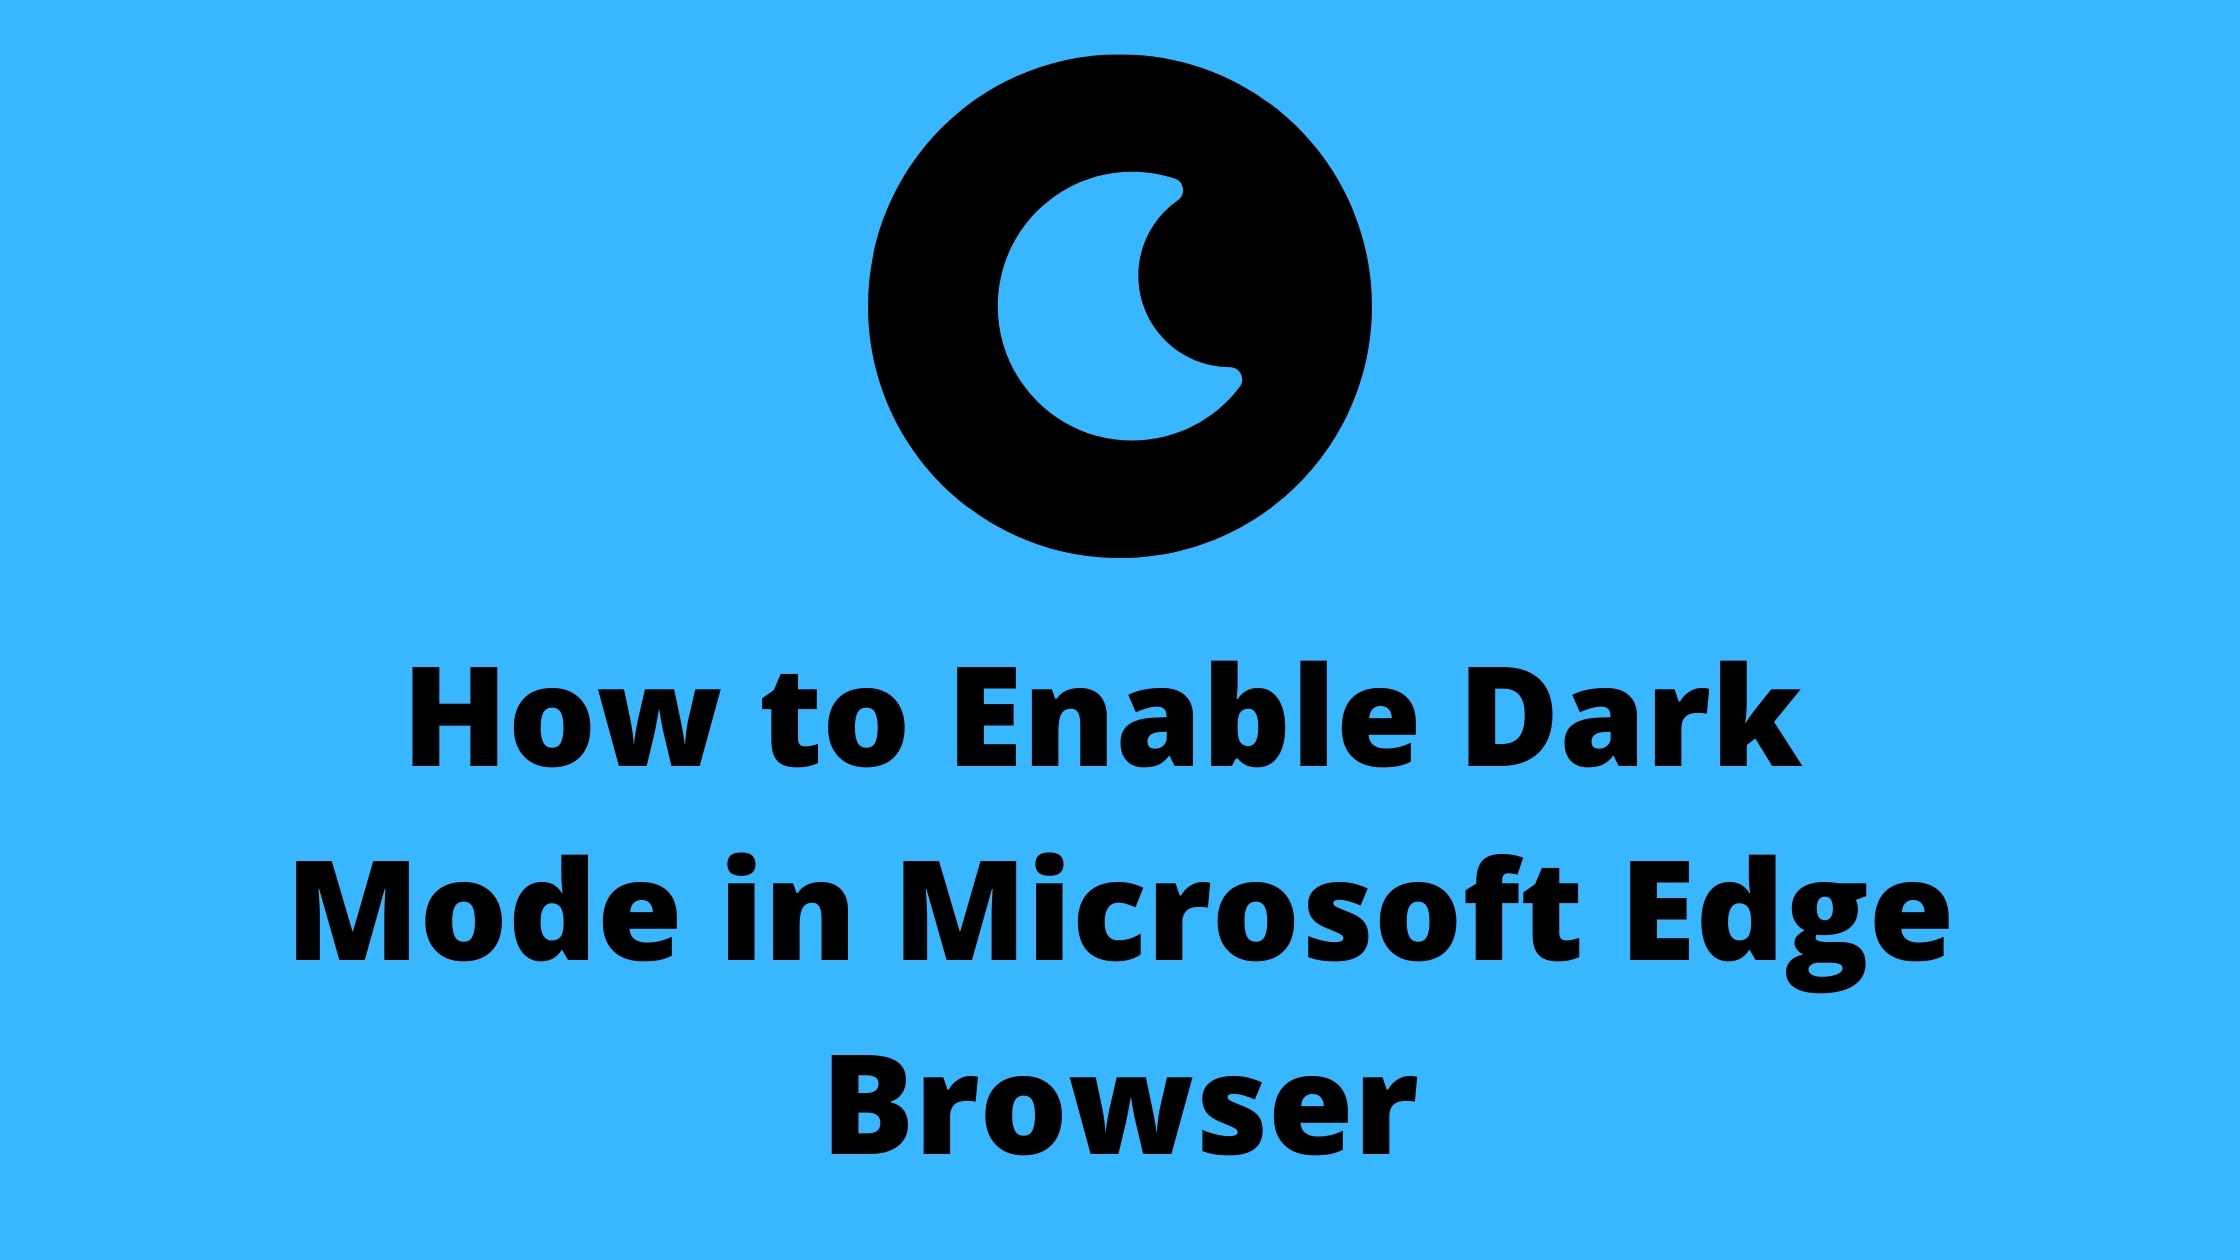 how to enable dark mode in Microsoft edge browser